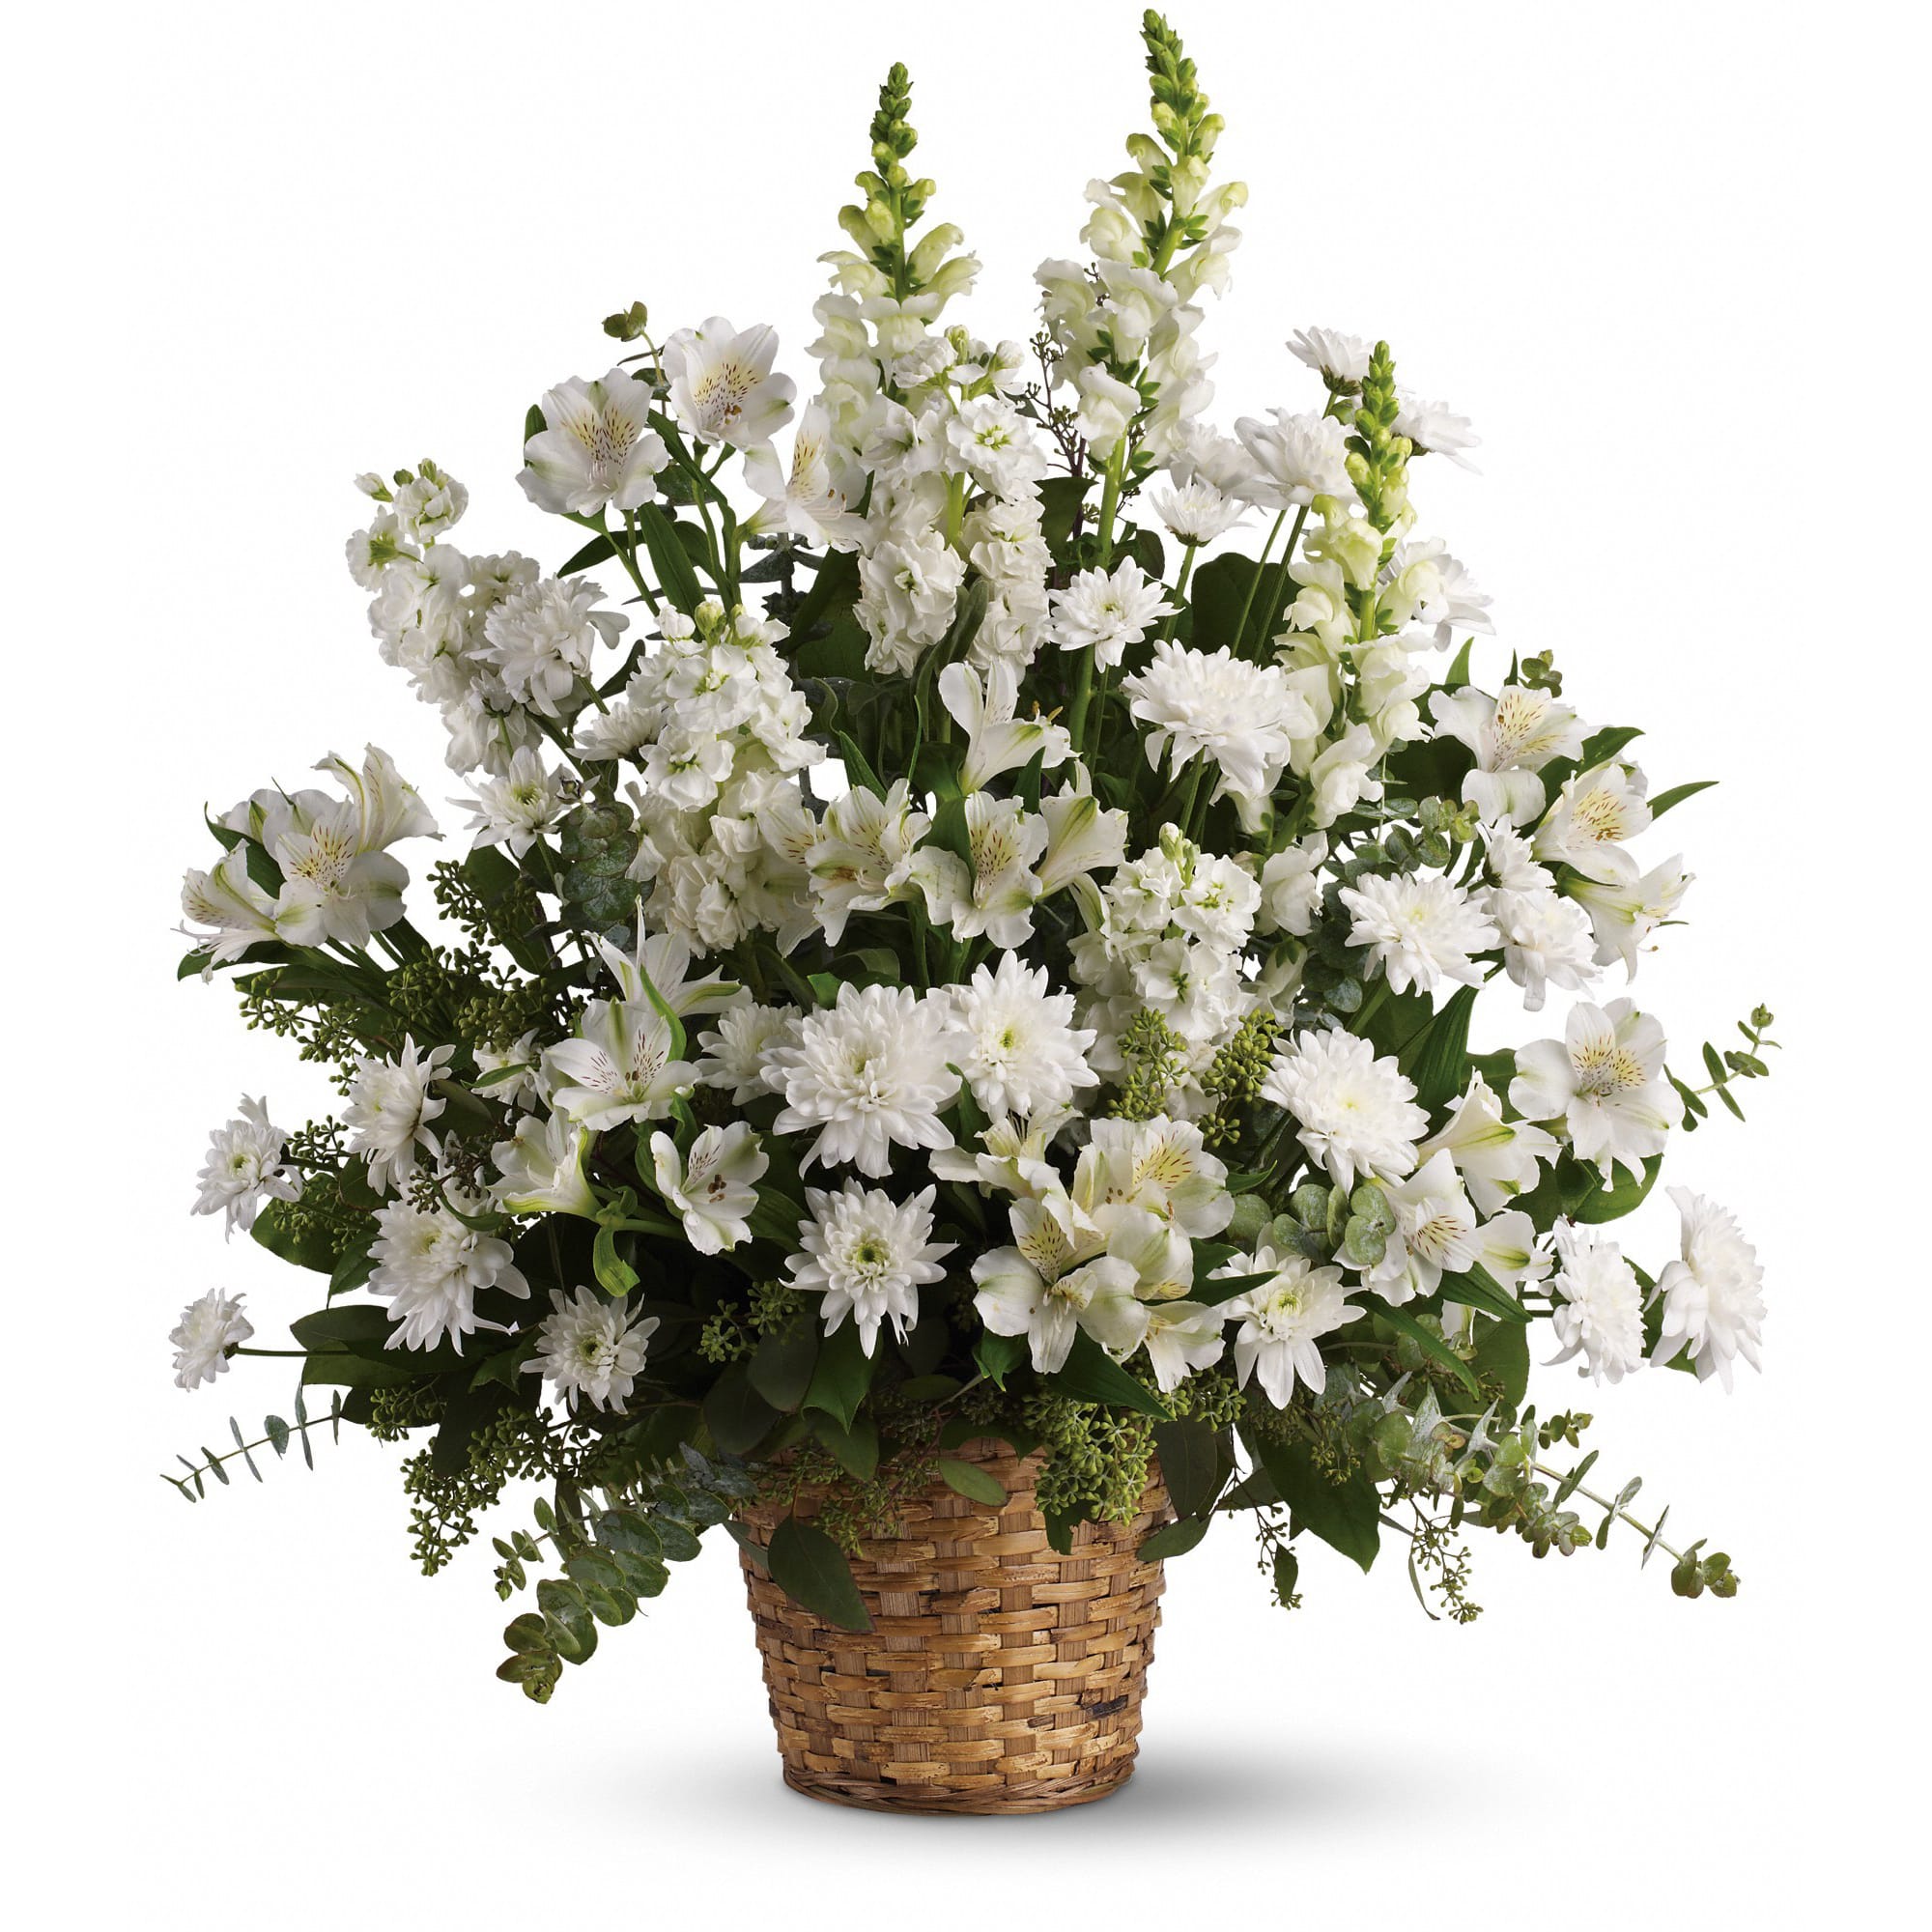 Heavenly Light by Teleflora - White alstroemeria, snapdragons and stock in a beautiful basket is a gift of caring that brings an air of serenity to the memorial service. Later, it will be a comfort for the family at home. 